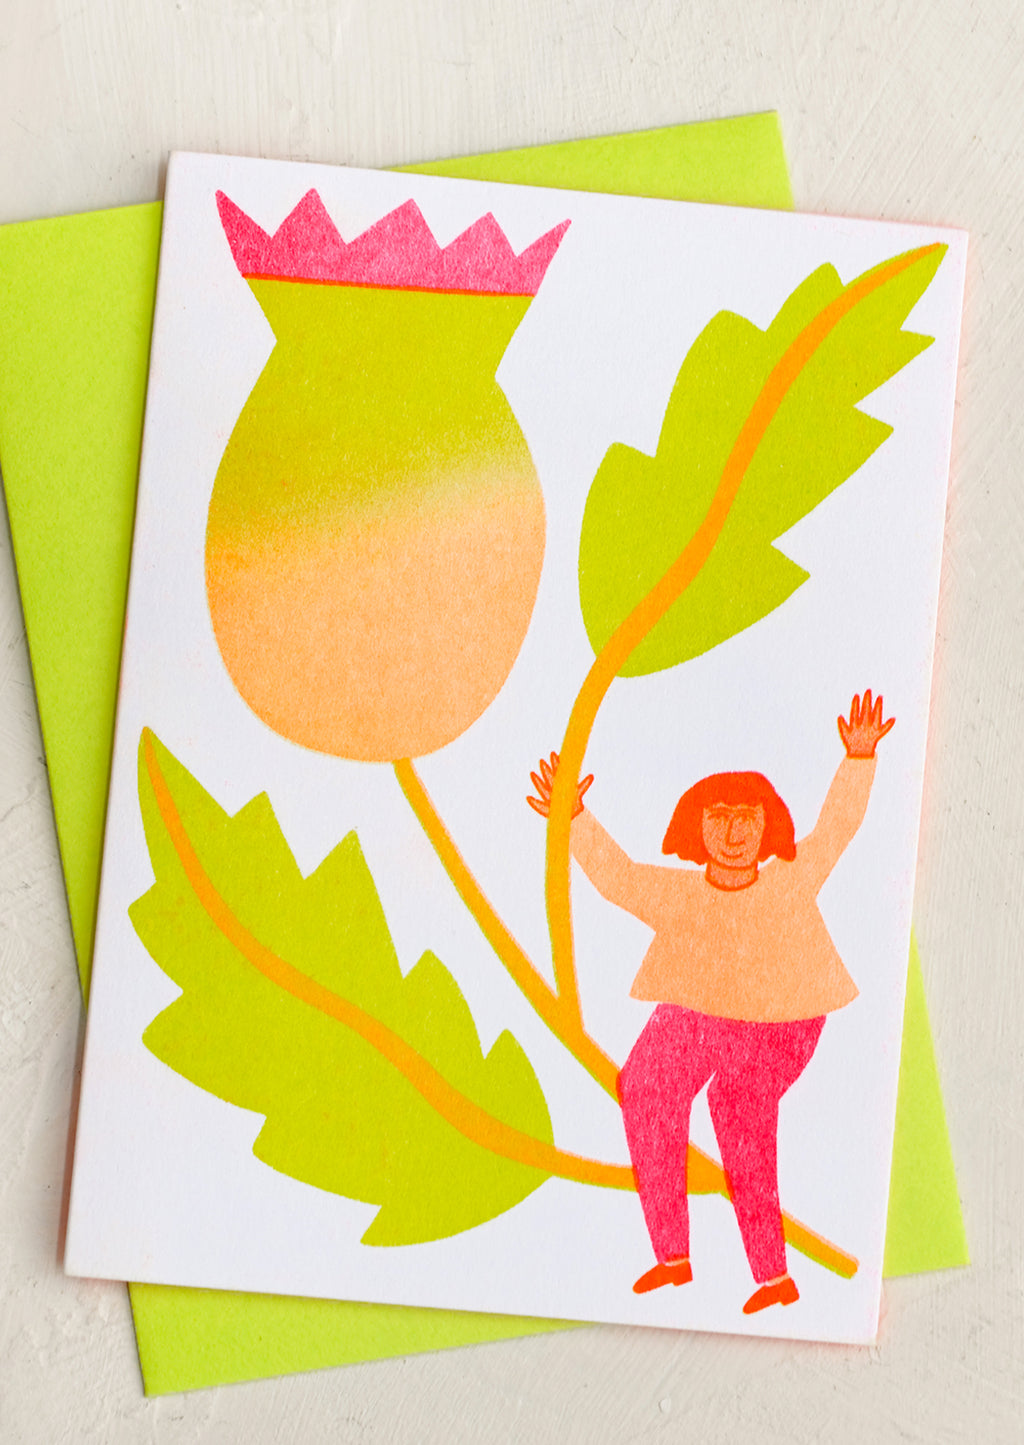 Thistle: A risograph neon printed card with image of girl holding giant thistle flower.